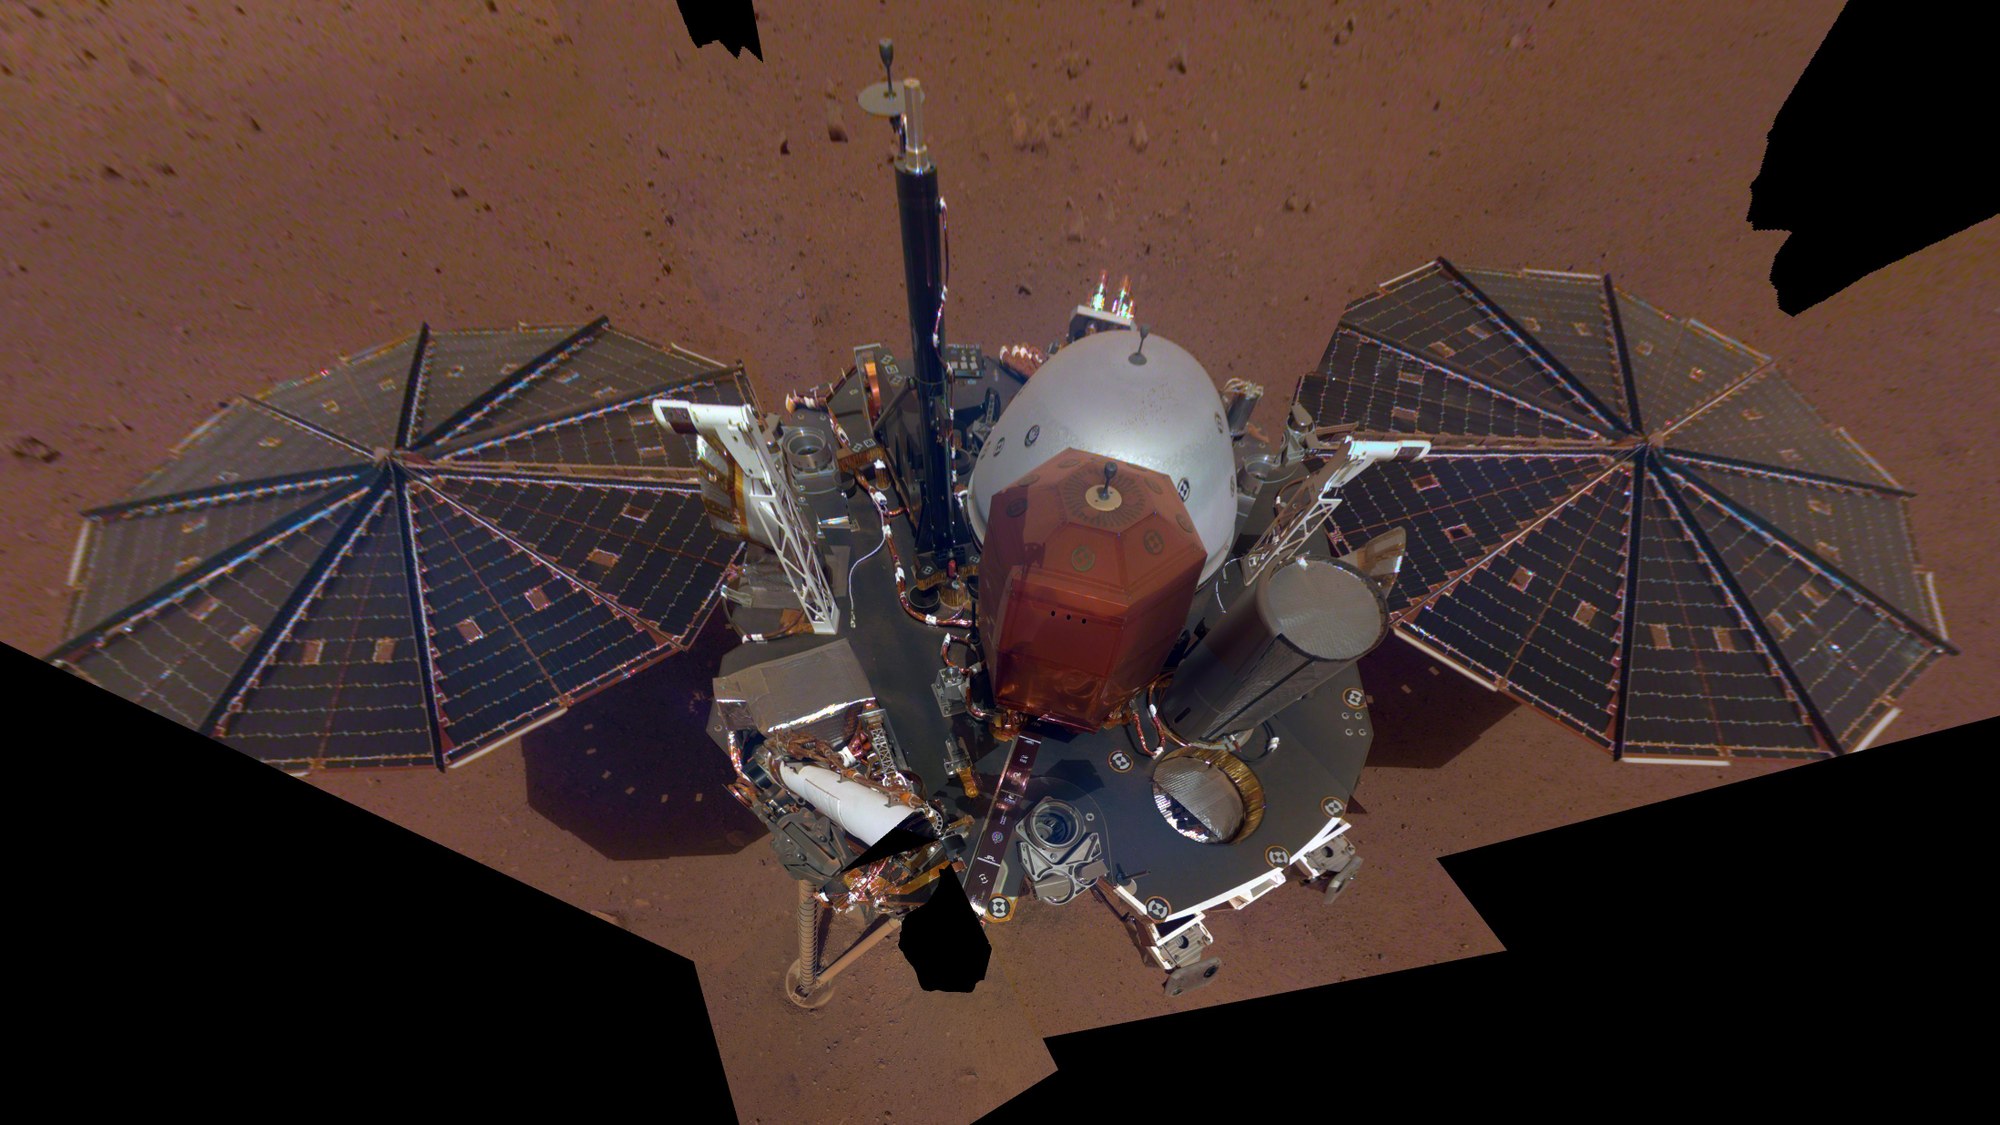 'Selfie' of the InSight lander on the Martian surface